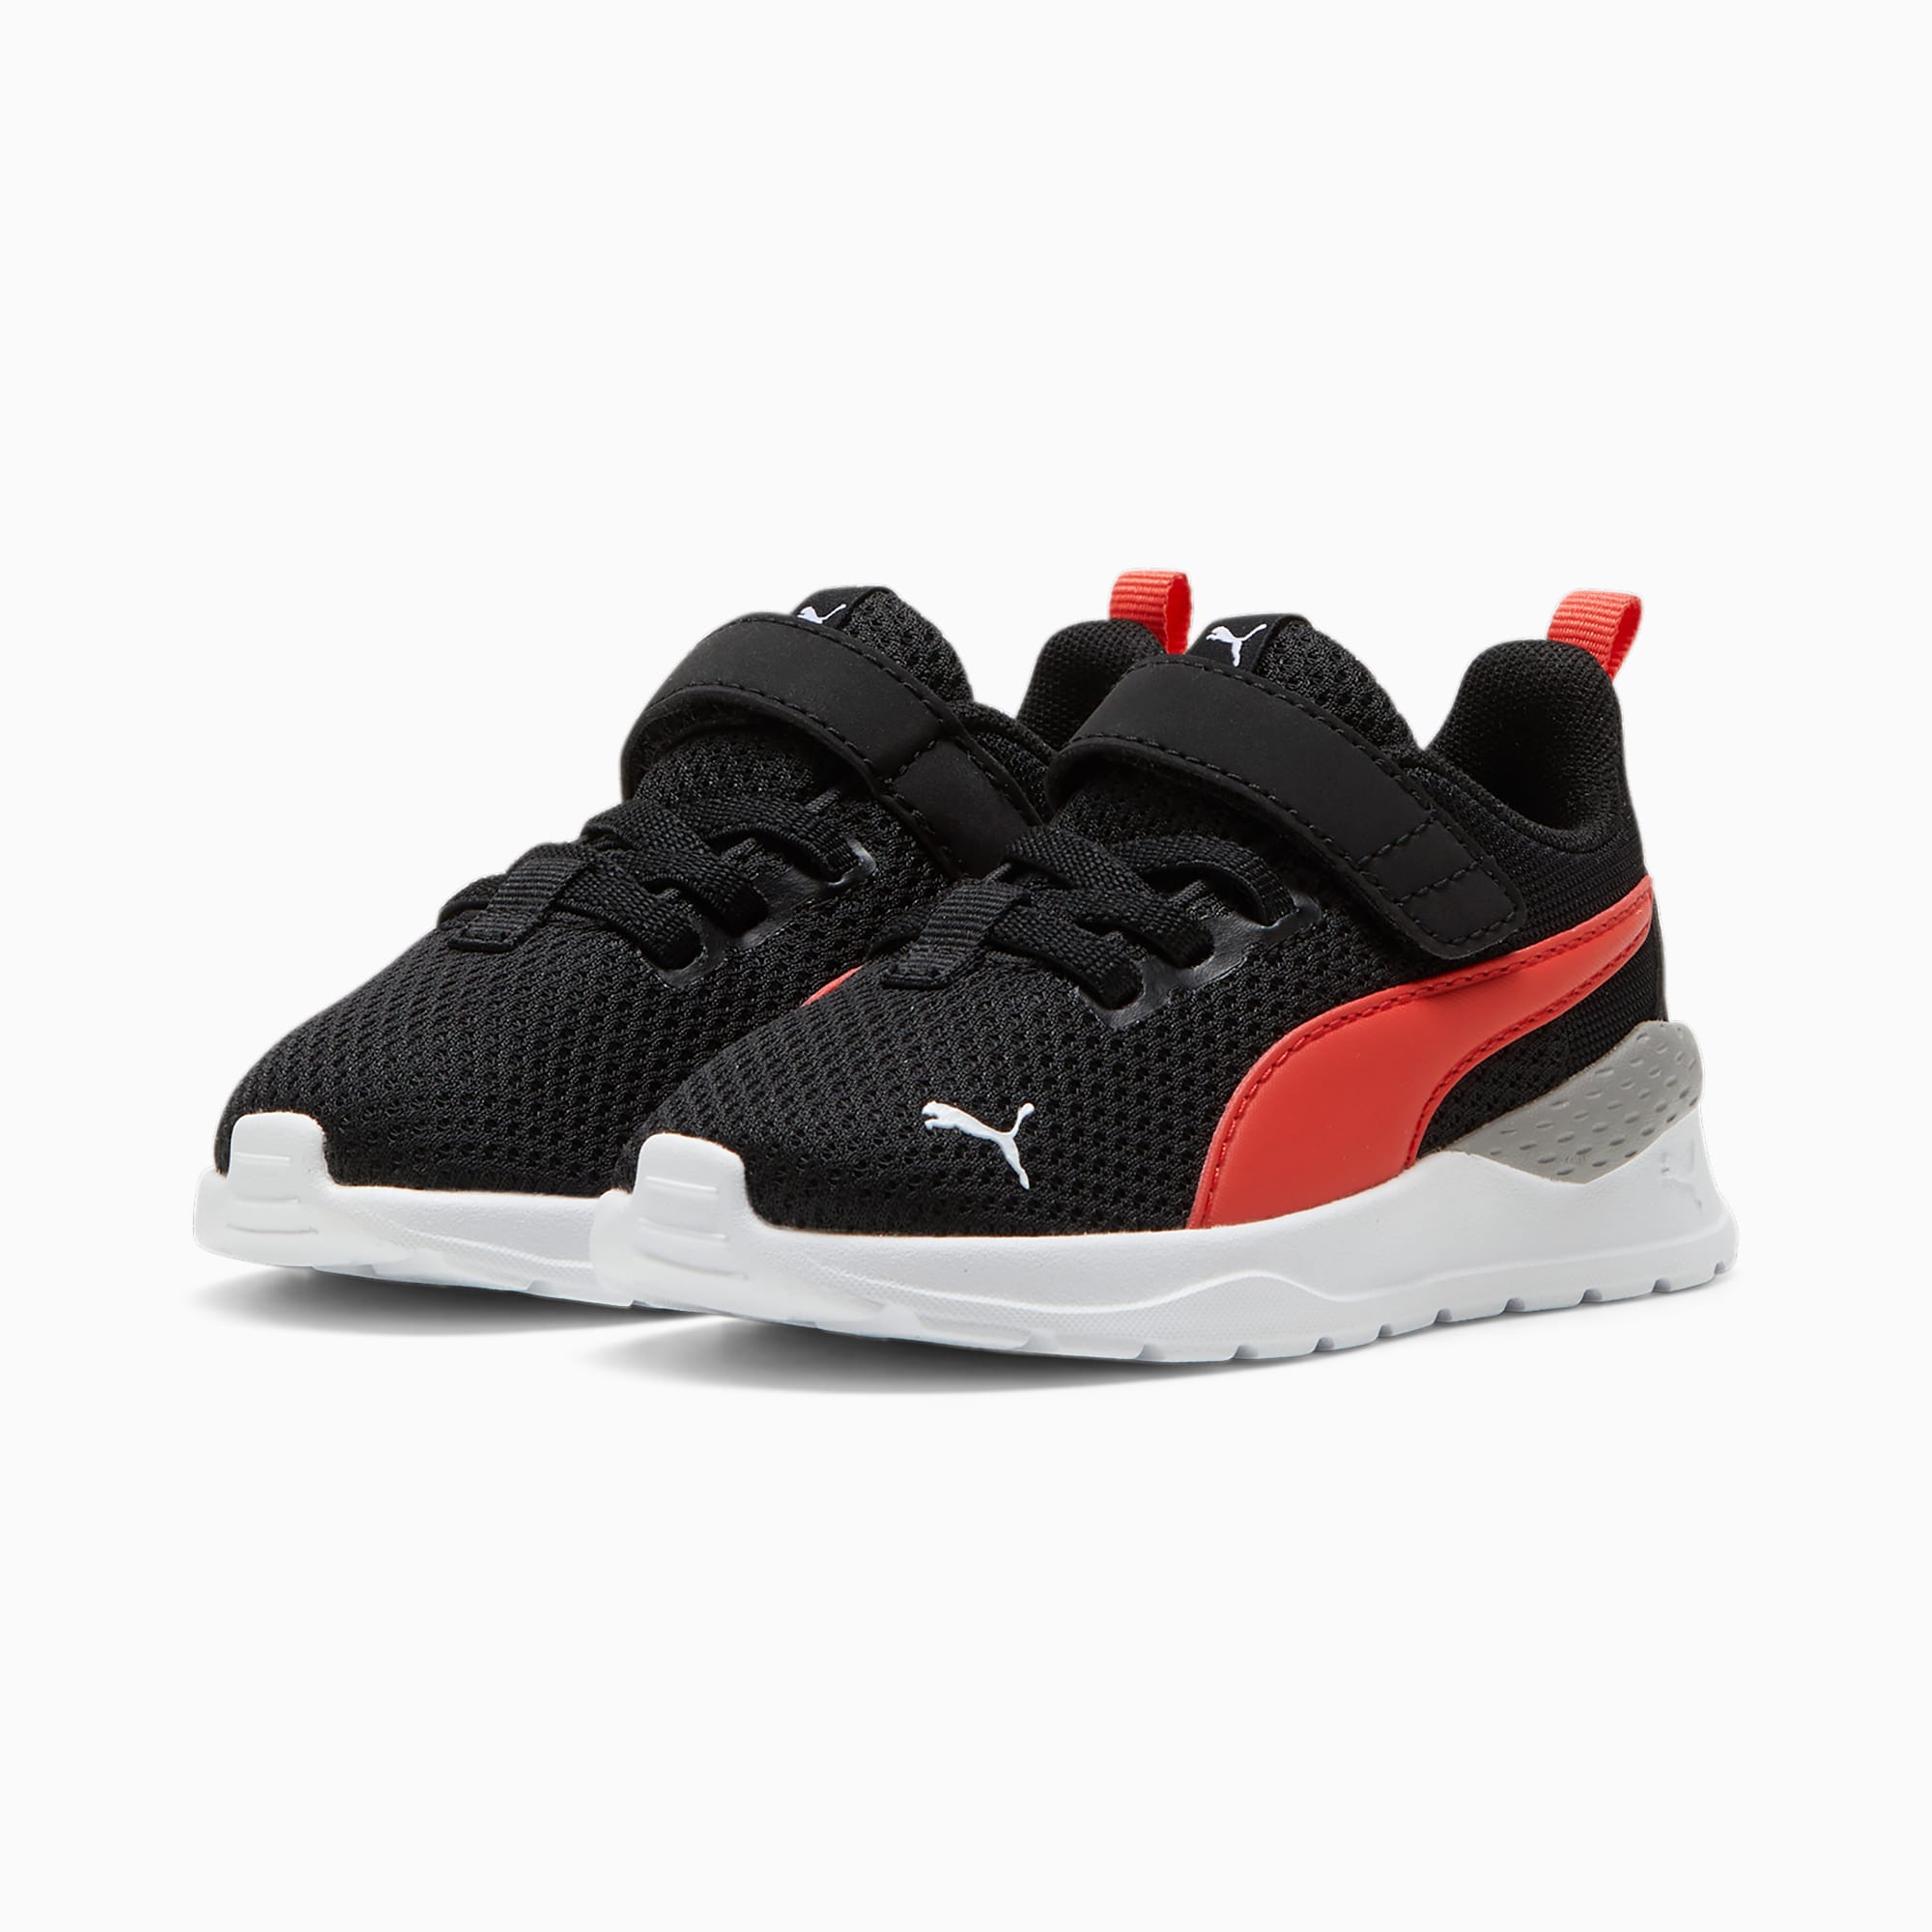 PUMA Anzarun Lite Babies' Trainers, Black/Active Red/White, Size 19, Shoes